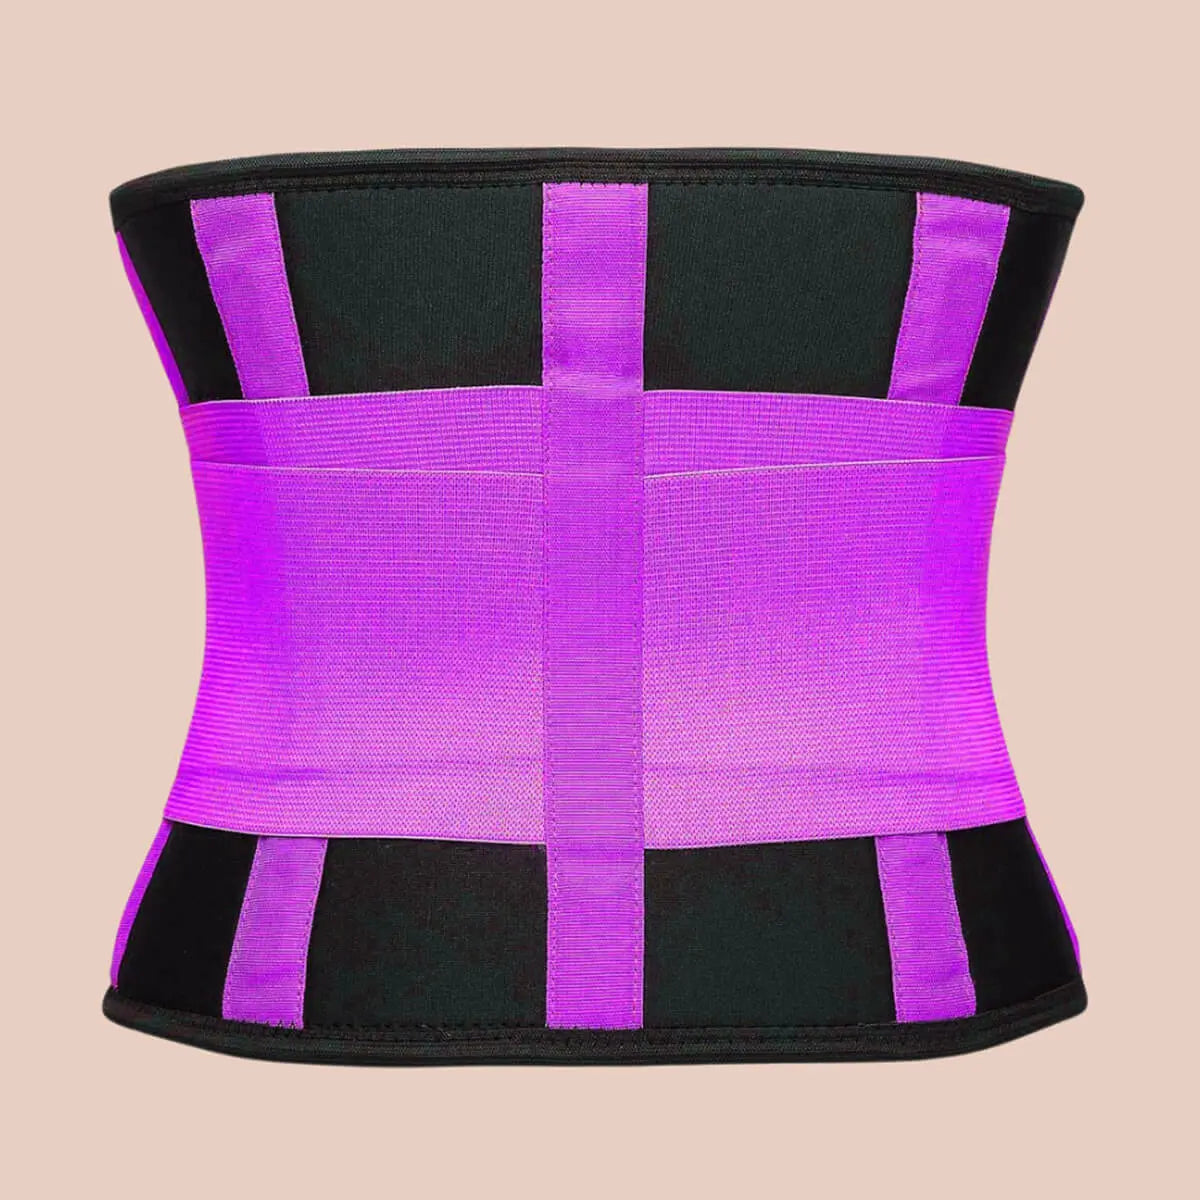 Plus Size Black Purple Waist Trainer Corset Belt For Women Slimming Fitness  Cincher In Black, Purple, Blue, Rose Red DHL From Ifashion89, $3.81